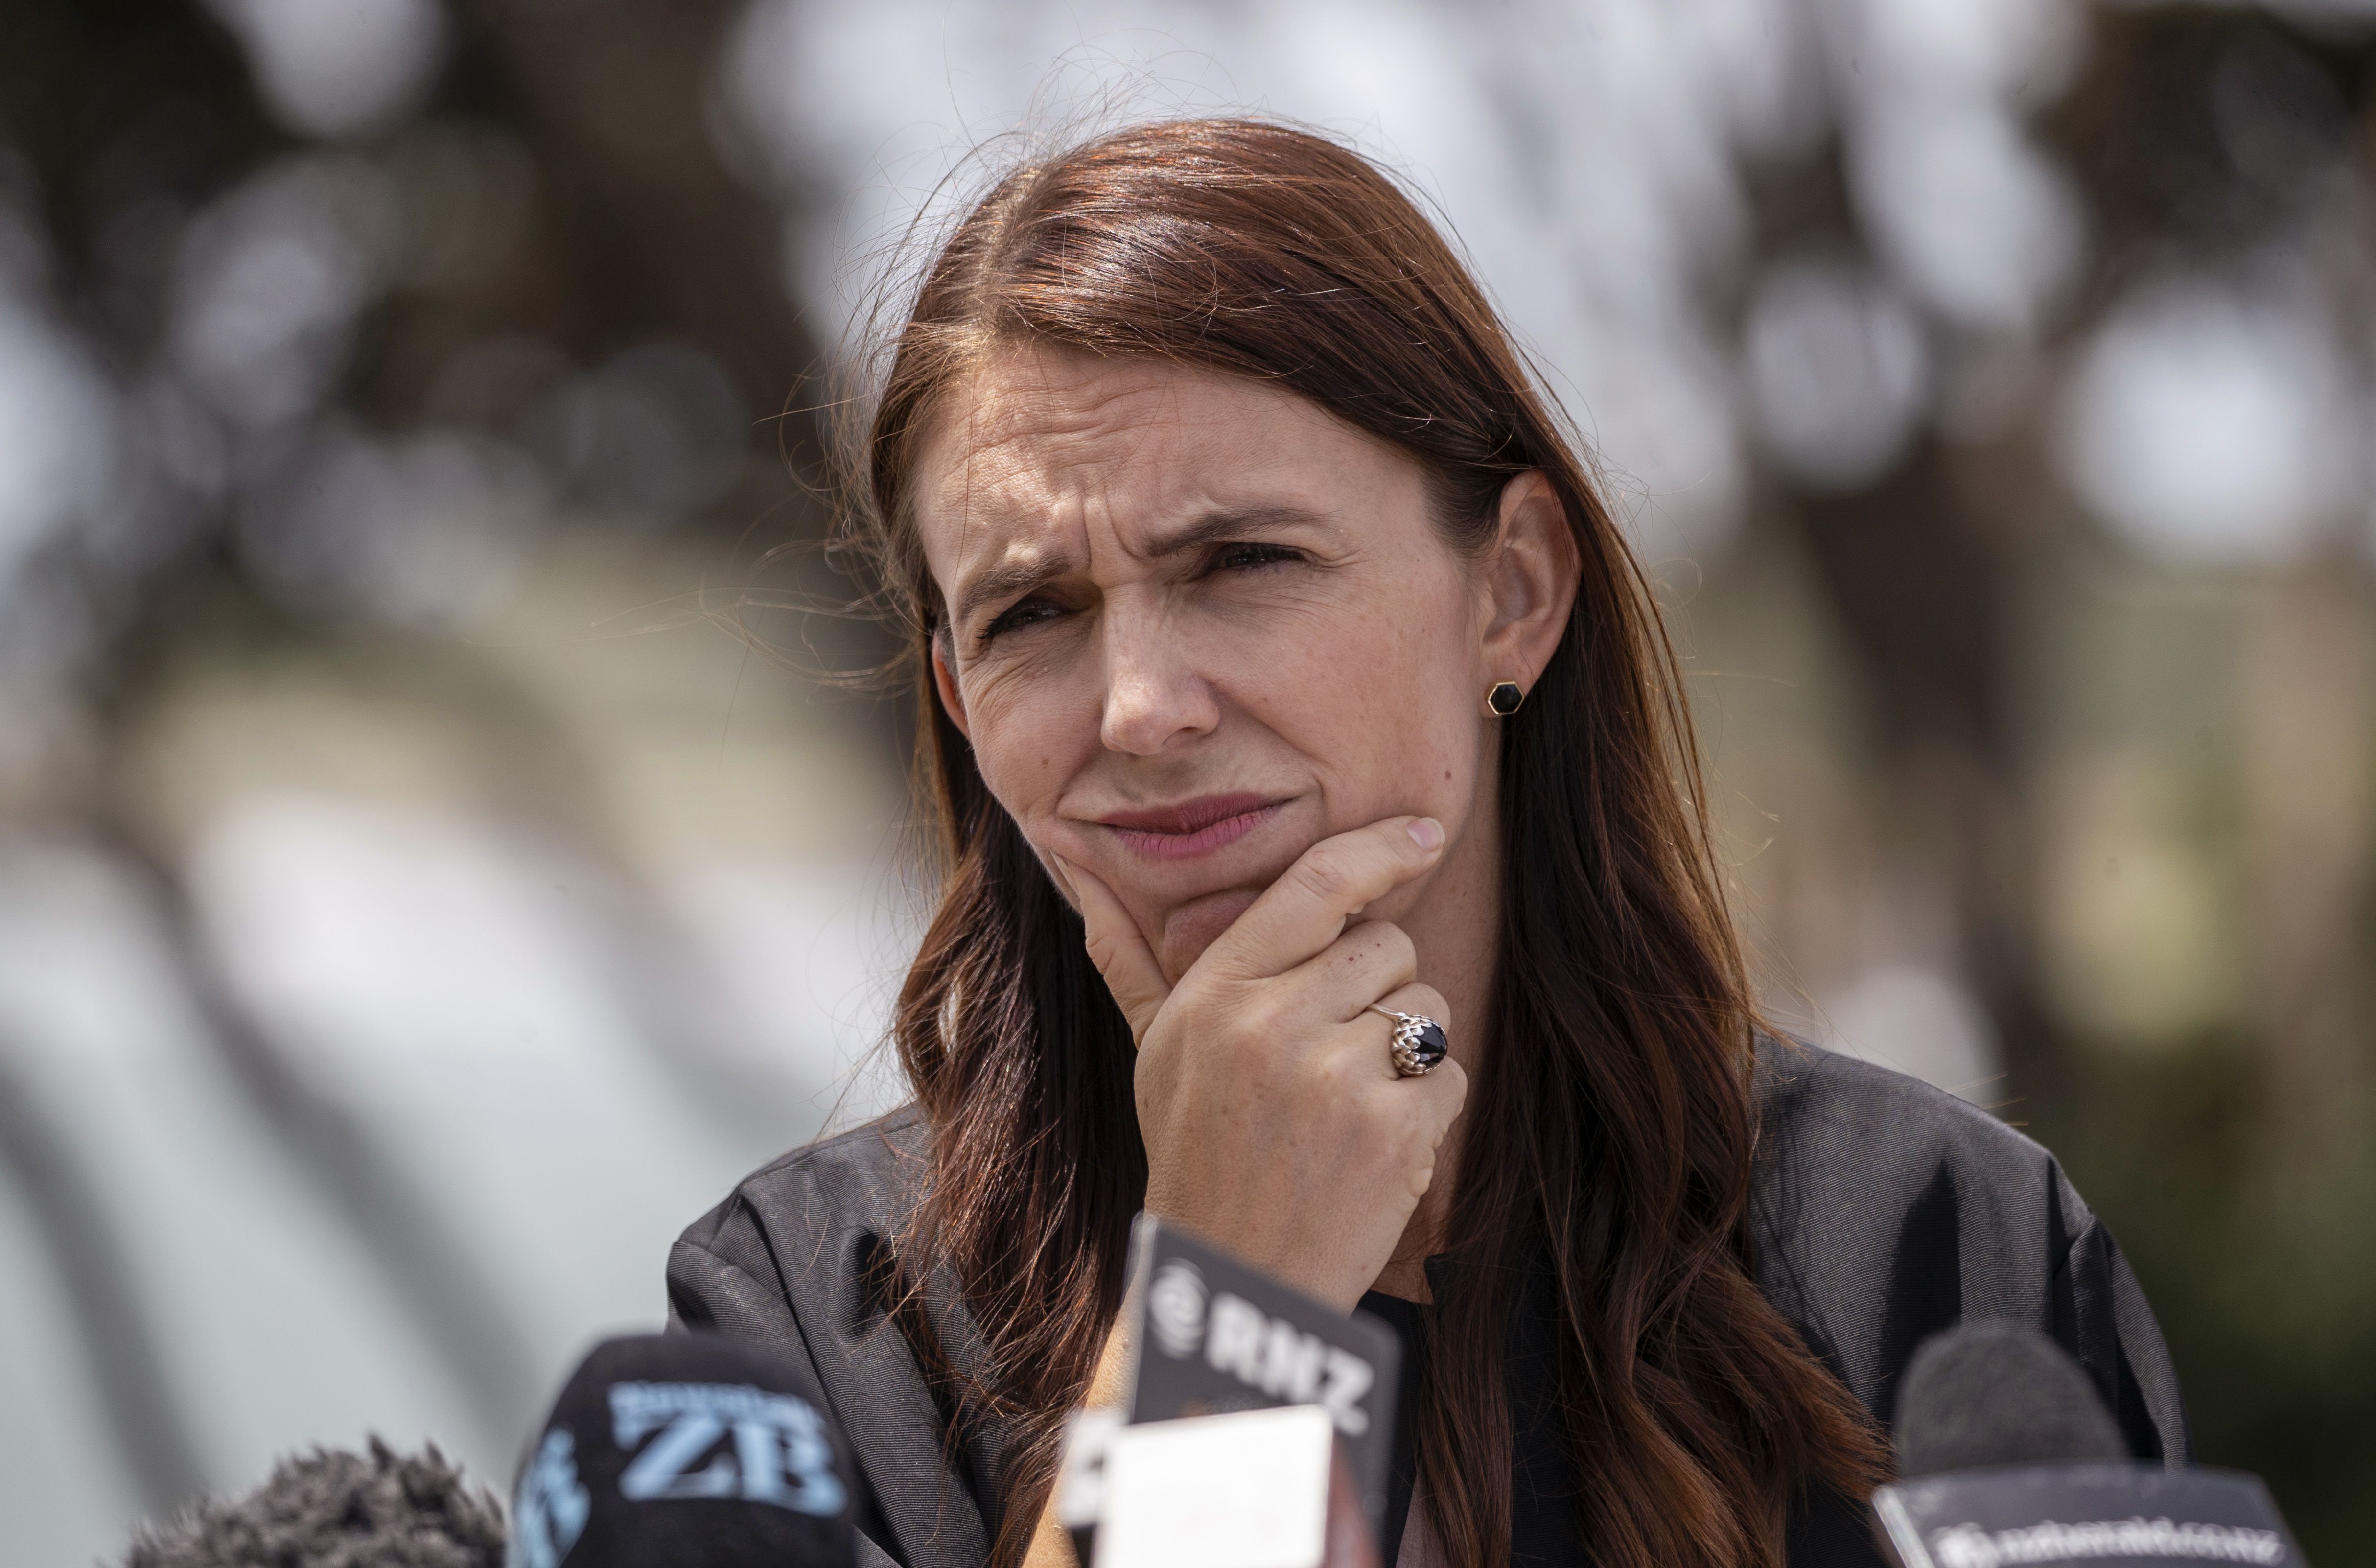 New Zealand Prime Minister Jacinda Ardern speaks about the COVID-19 situation. (AP photo)